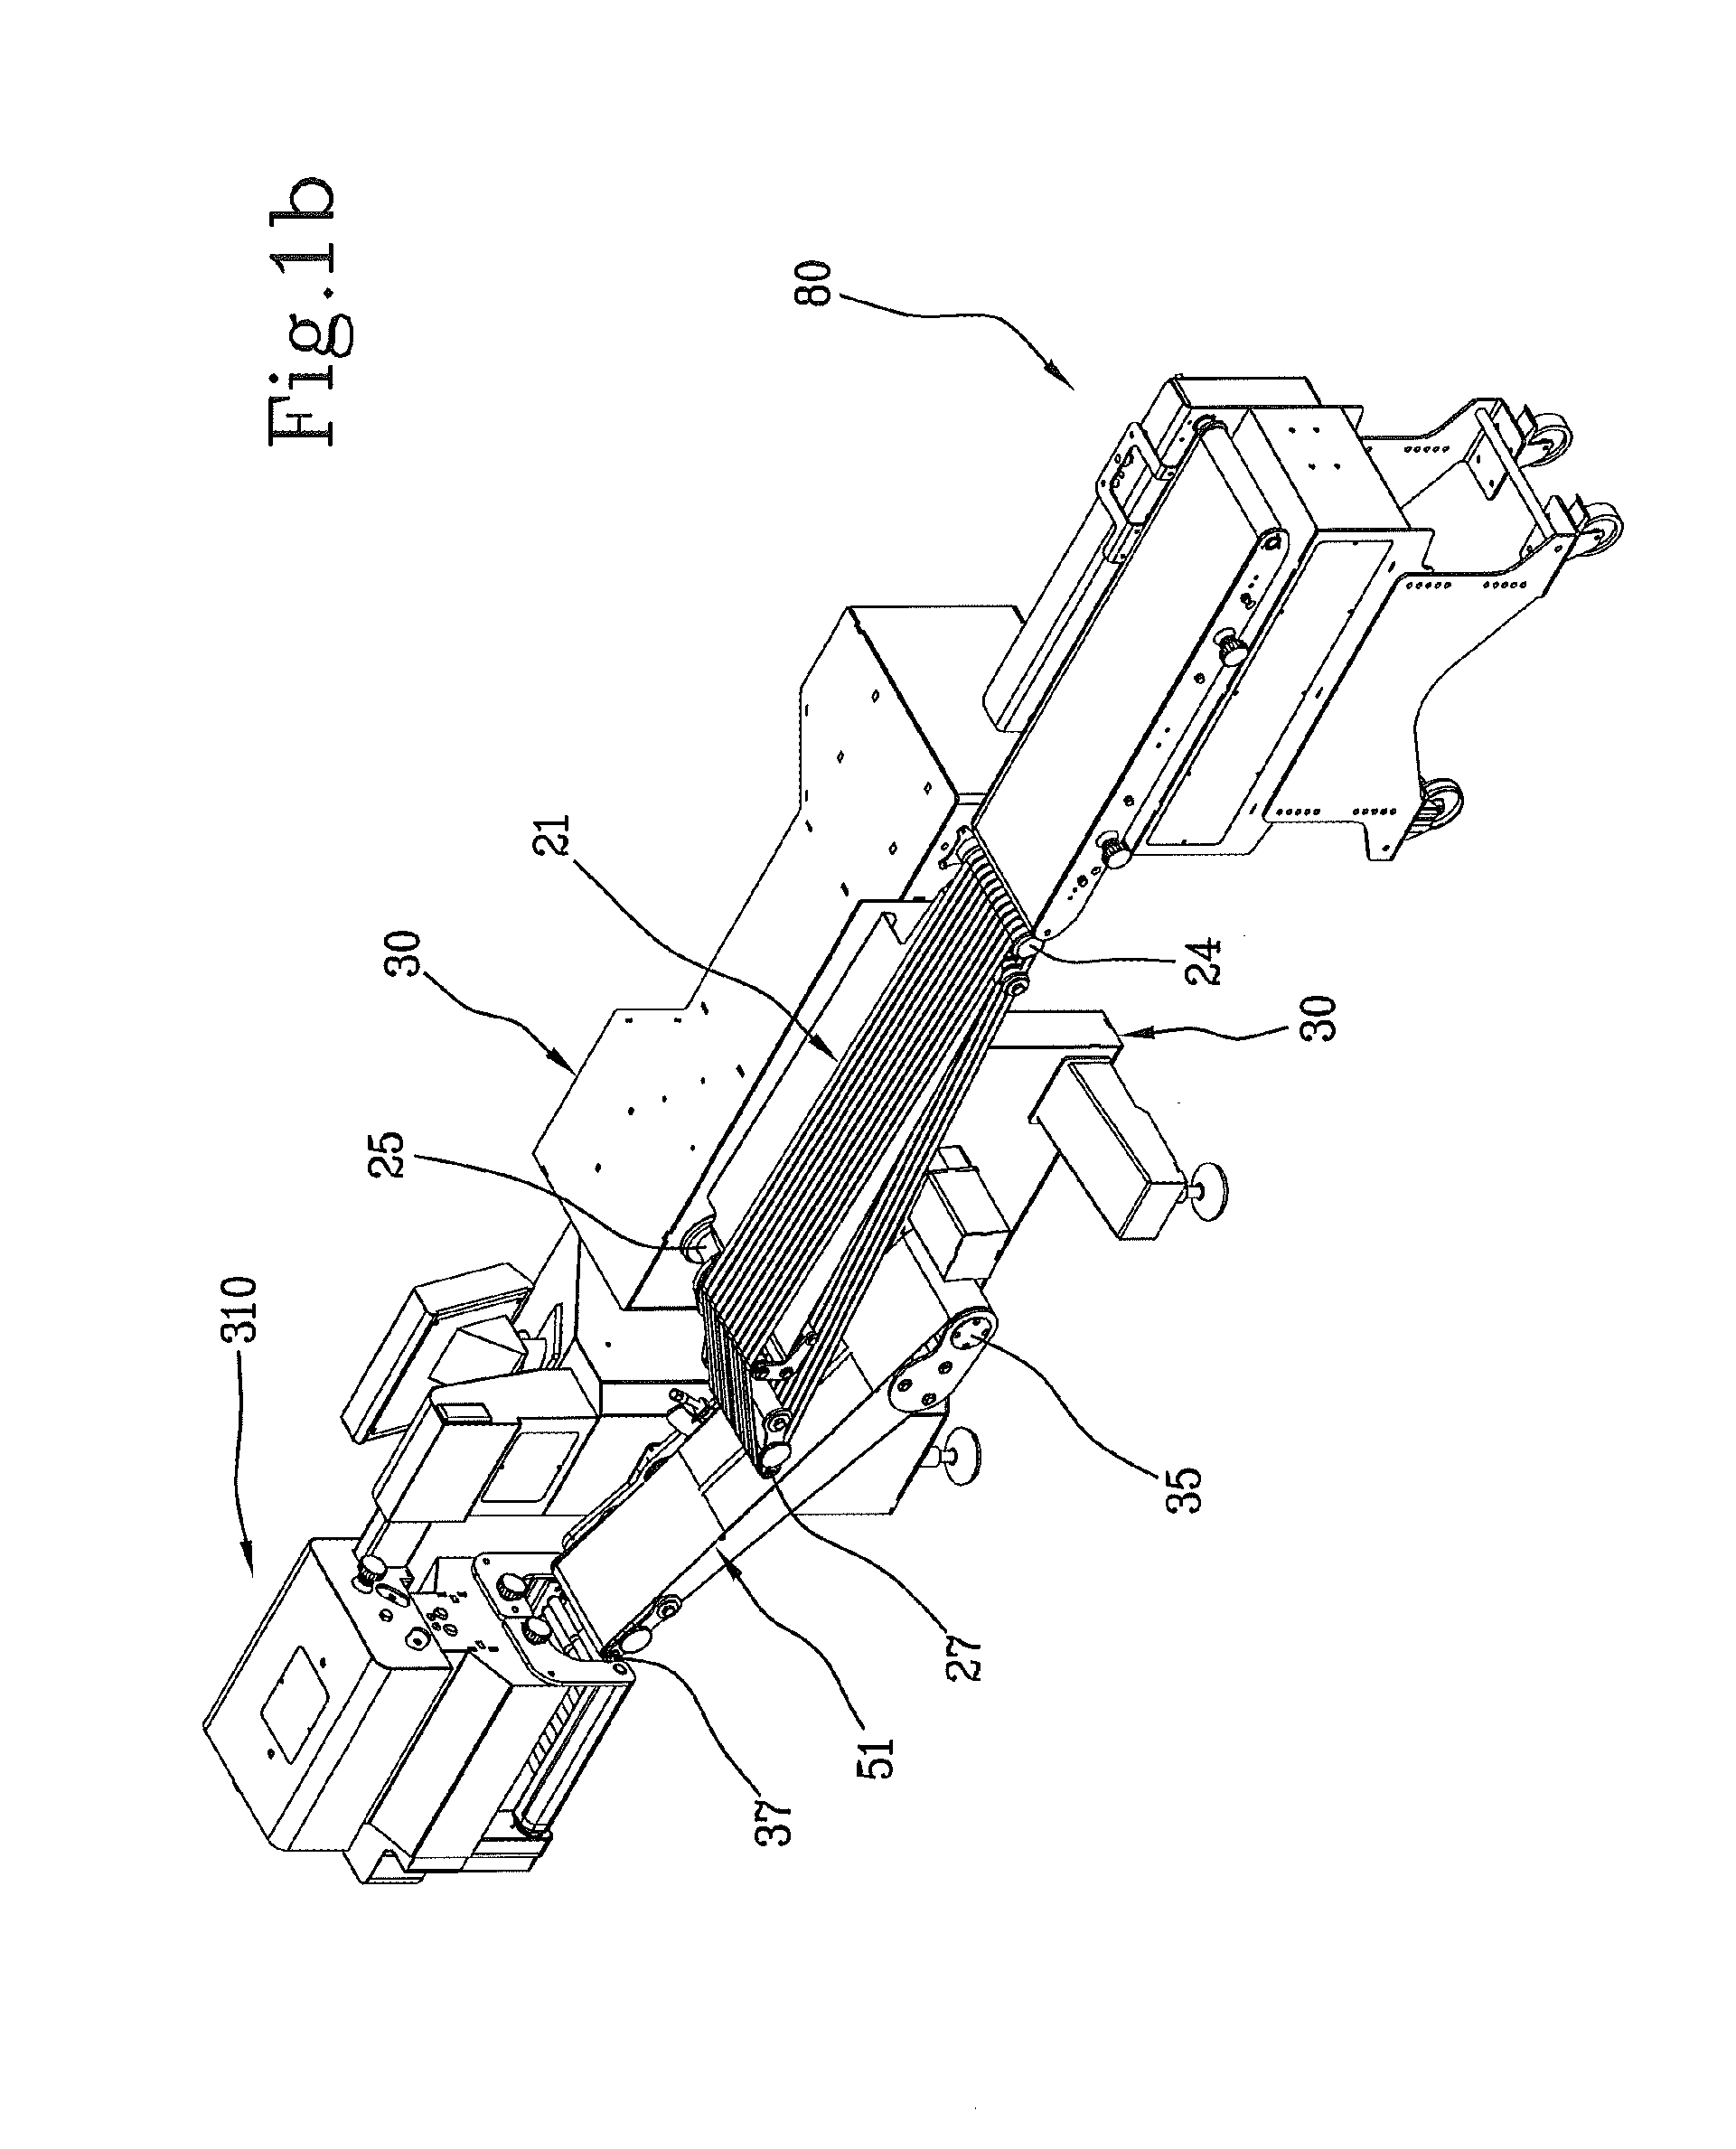 Apparatus for laying sliced foods into containers